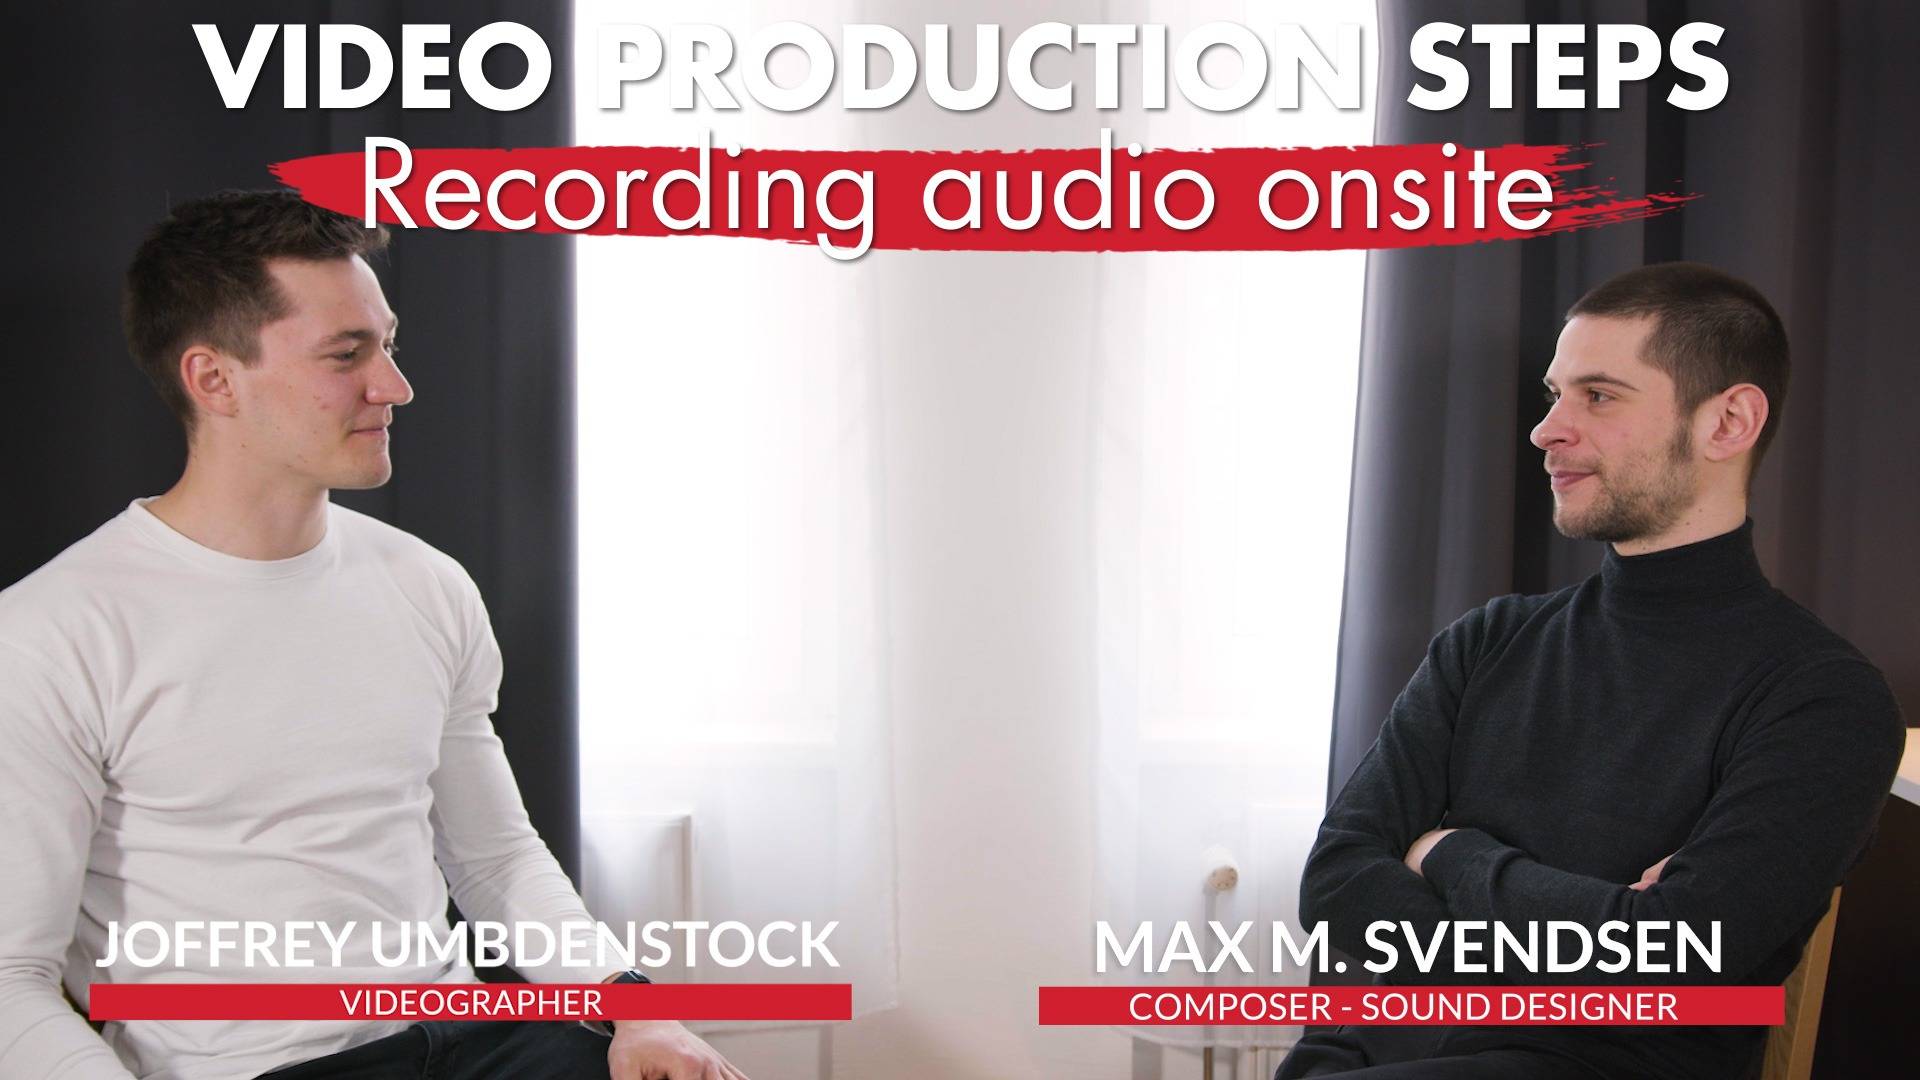 ITW Video production steps Recording audio onsite